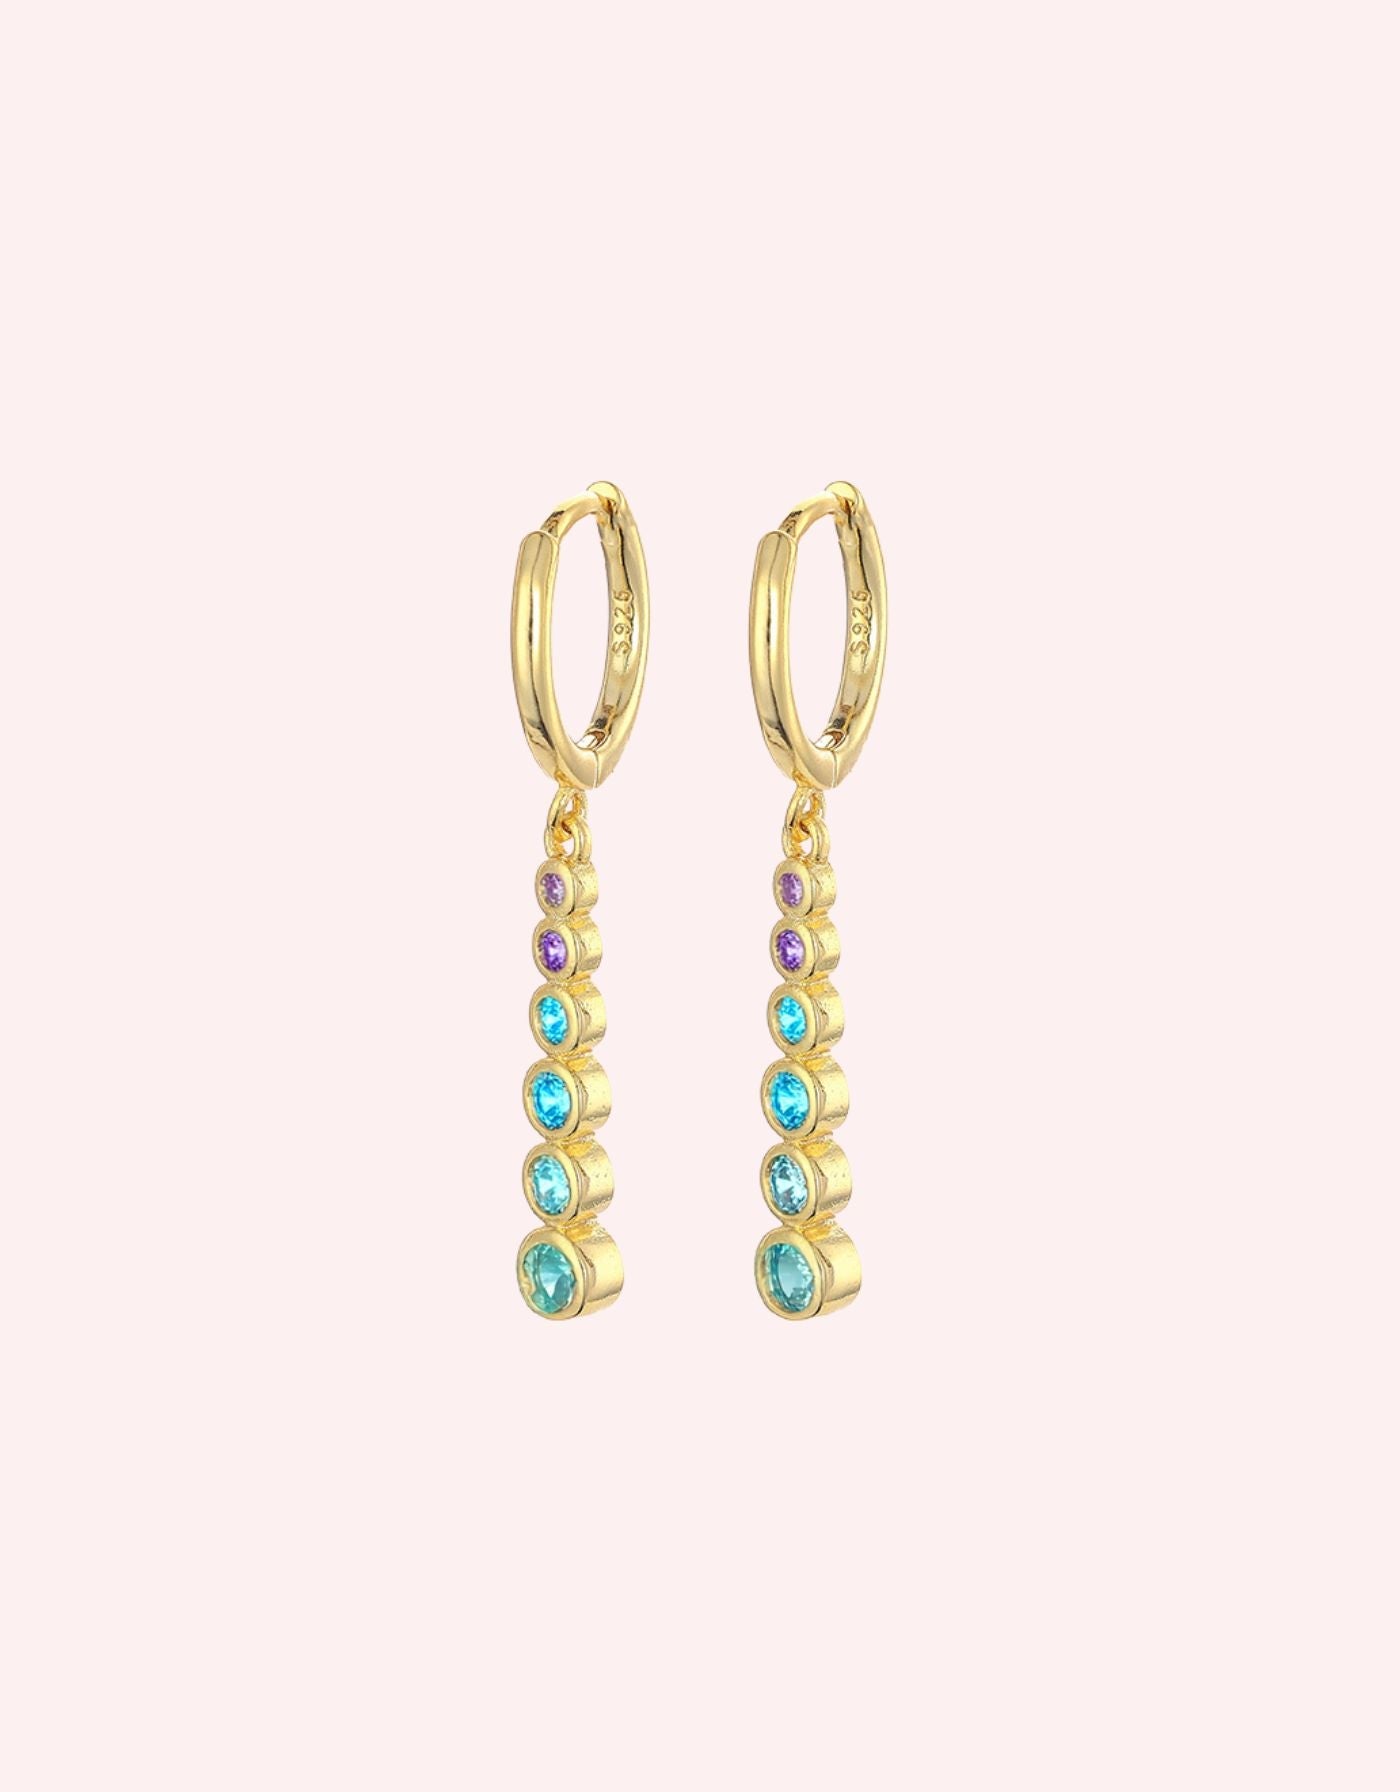 summer earrings, cubic zirconia huggies, wedding guest earrings. Crystal huggie hoops with sparkling gemstones, stylish and versatile earrings perfect for everyday wear, featuring secure closures and high-quality materials